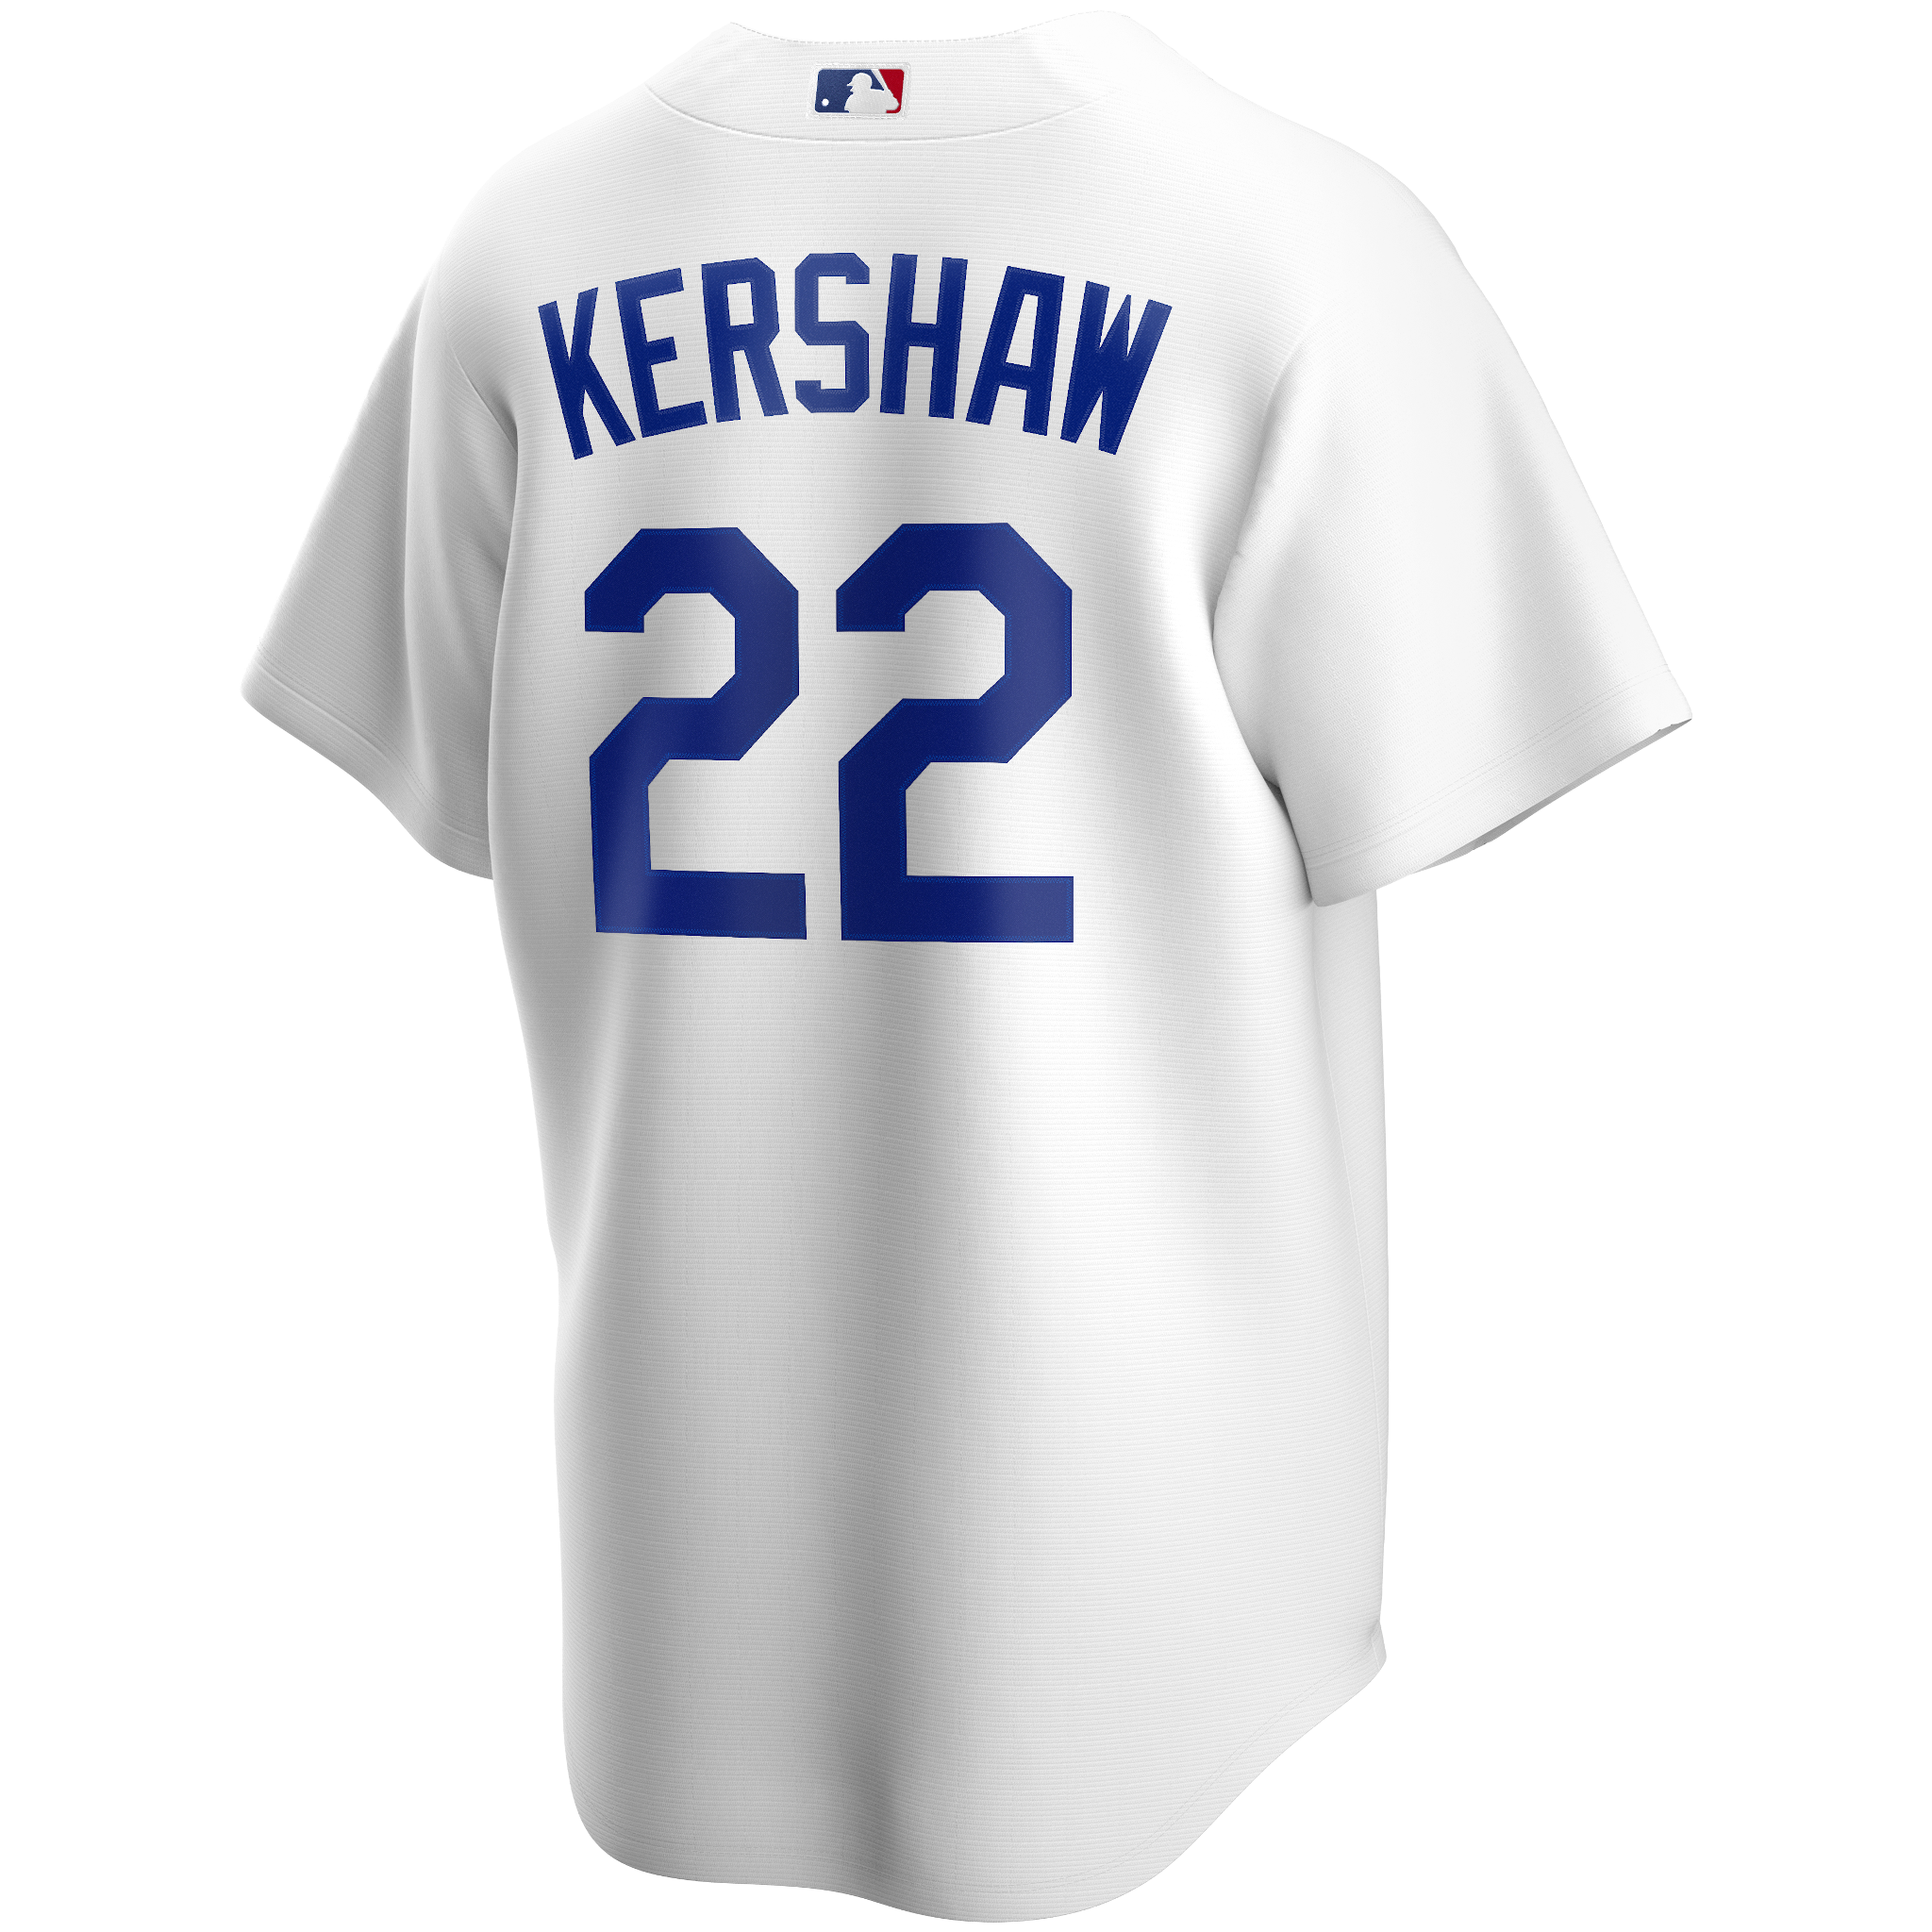 Nike Men's Clayton Kershaw Los Angeles Dodgers Official Player Replica Jersey - White